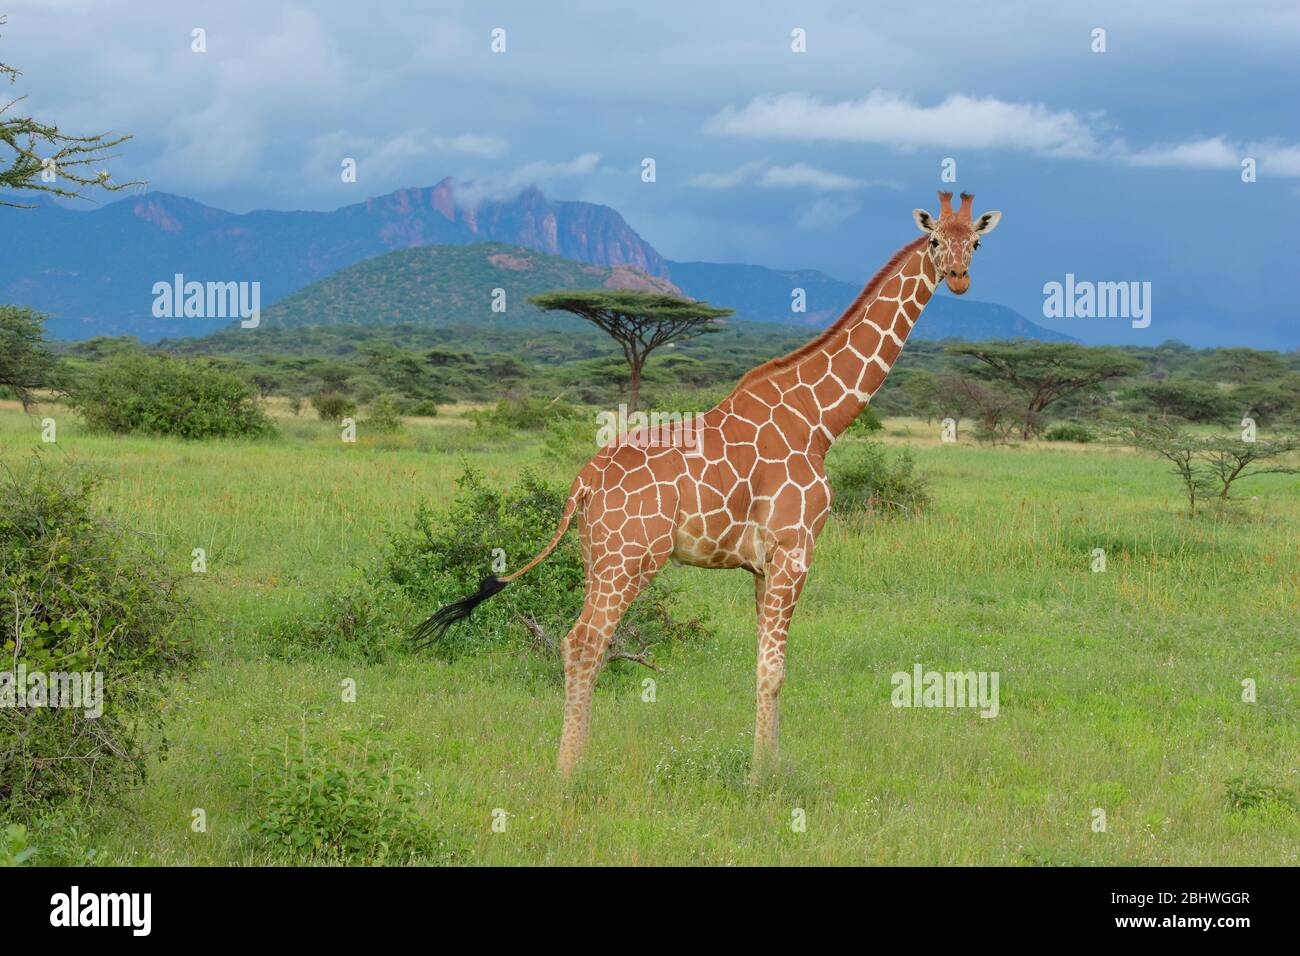 Reticulated giraffe in lush summer conditions, Buffalo Springs reserve, Kenya Stock Photo